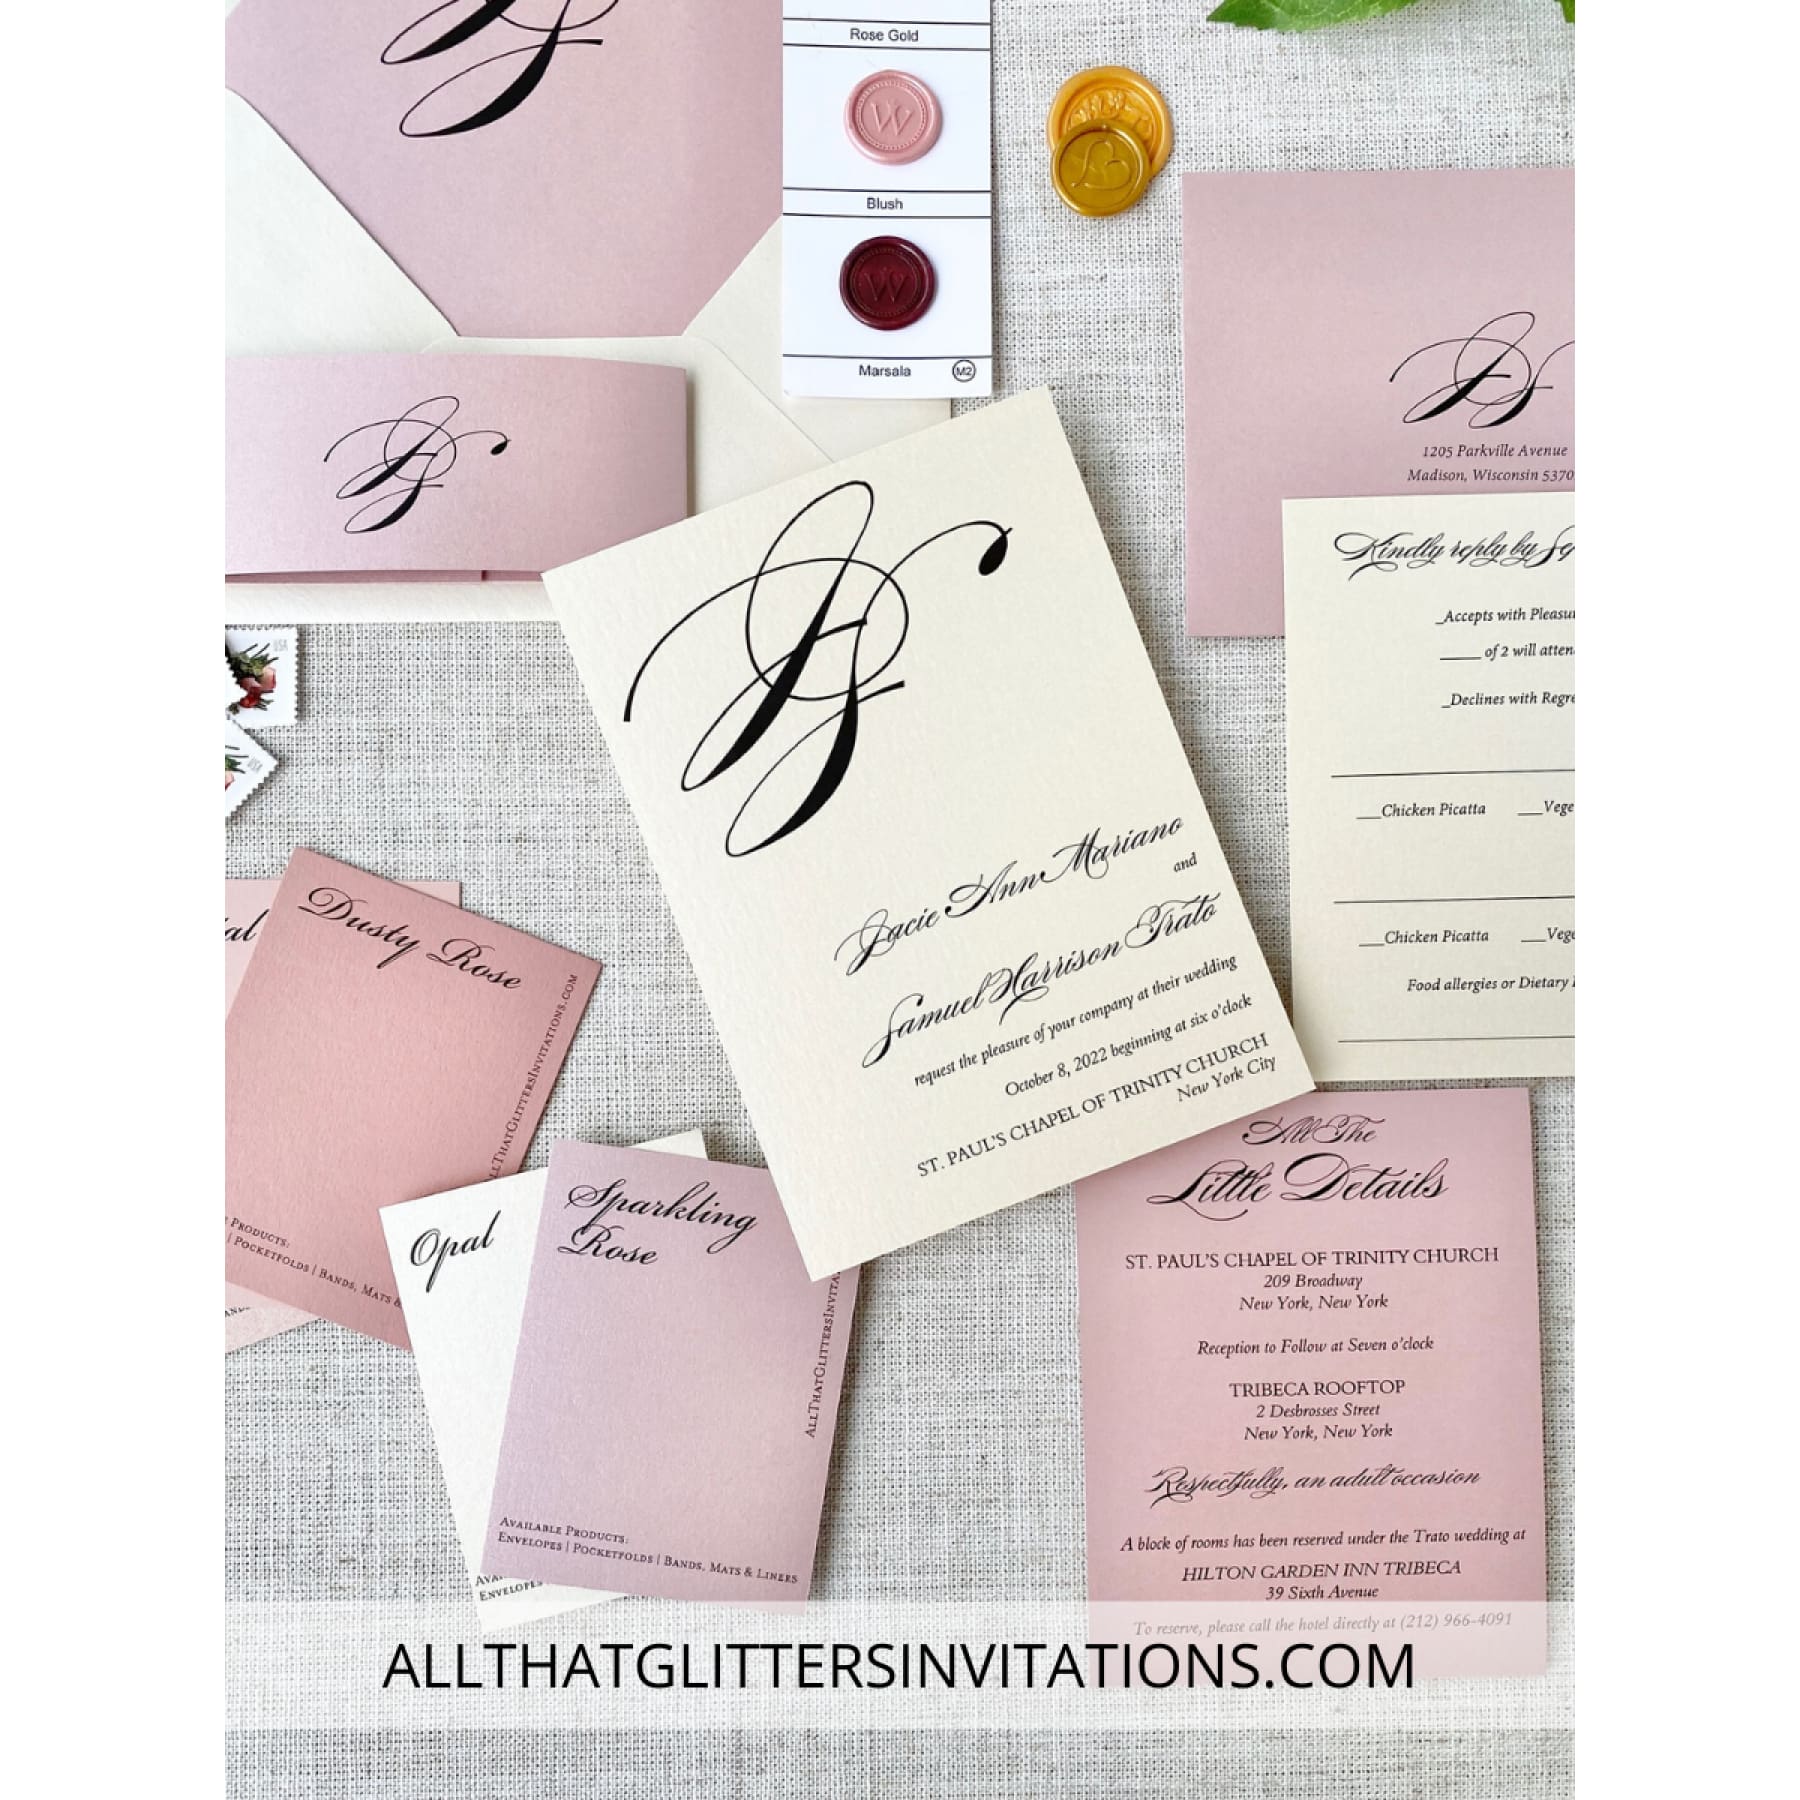 Multi-color wedding invitations with initial monogram - All That Glitters Invitations